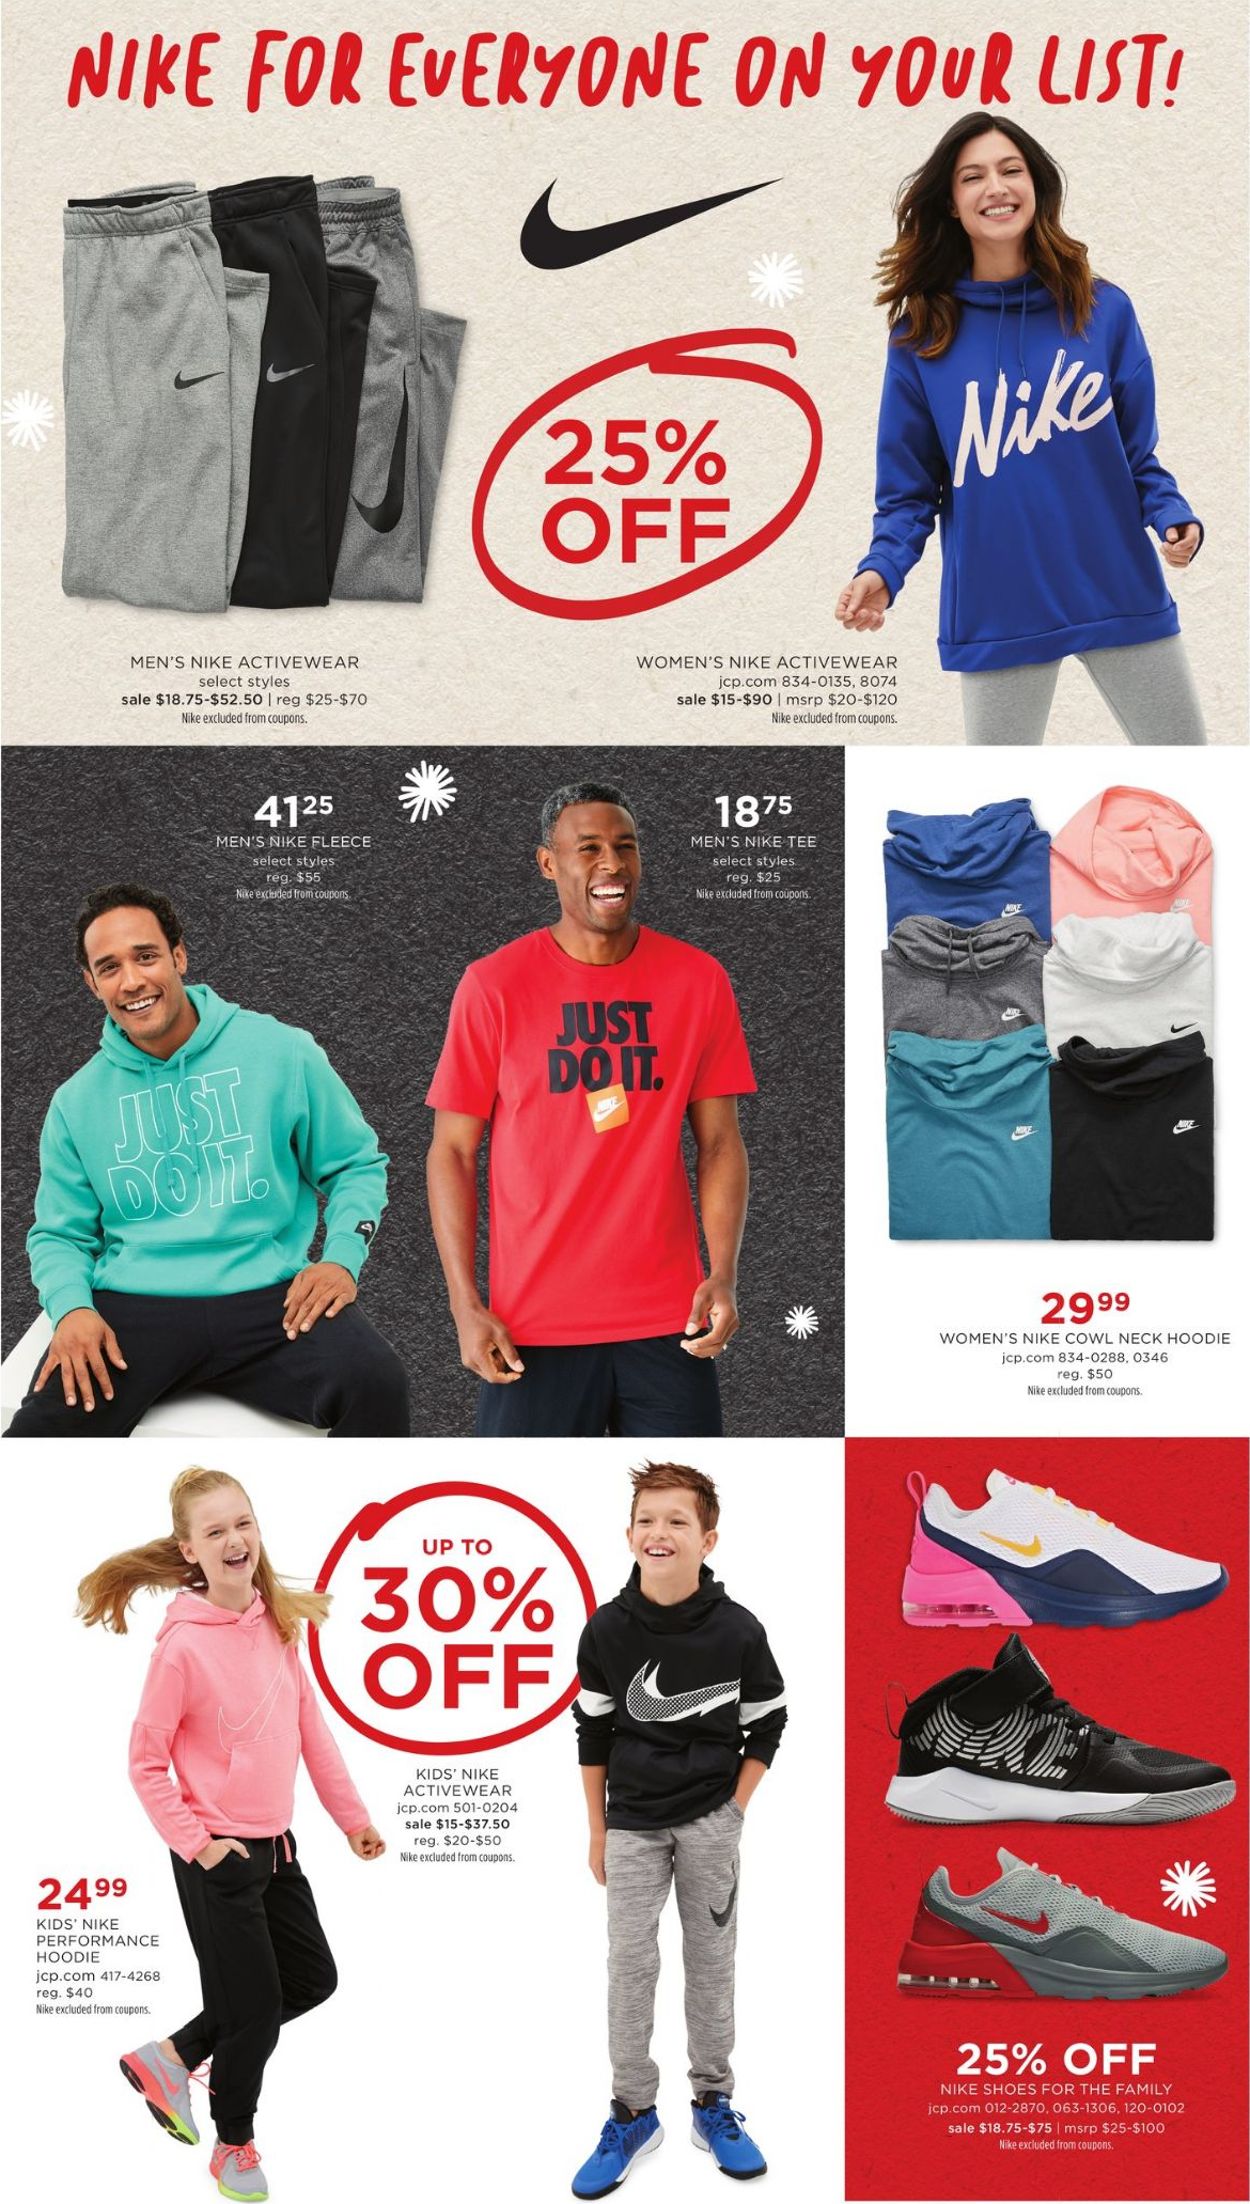 JCPenney Current weekly ad 11/30 - 11/30/2019 [5] - frequent-ads.com